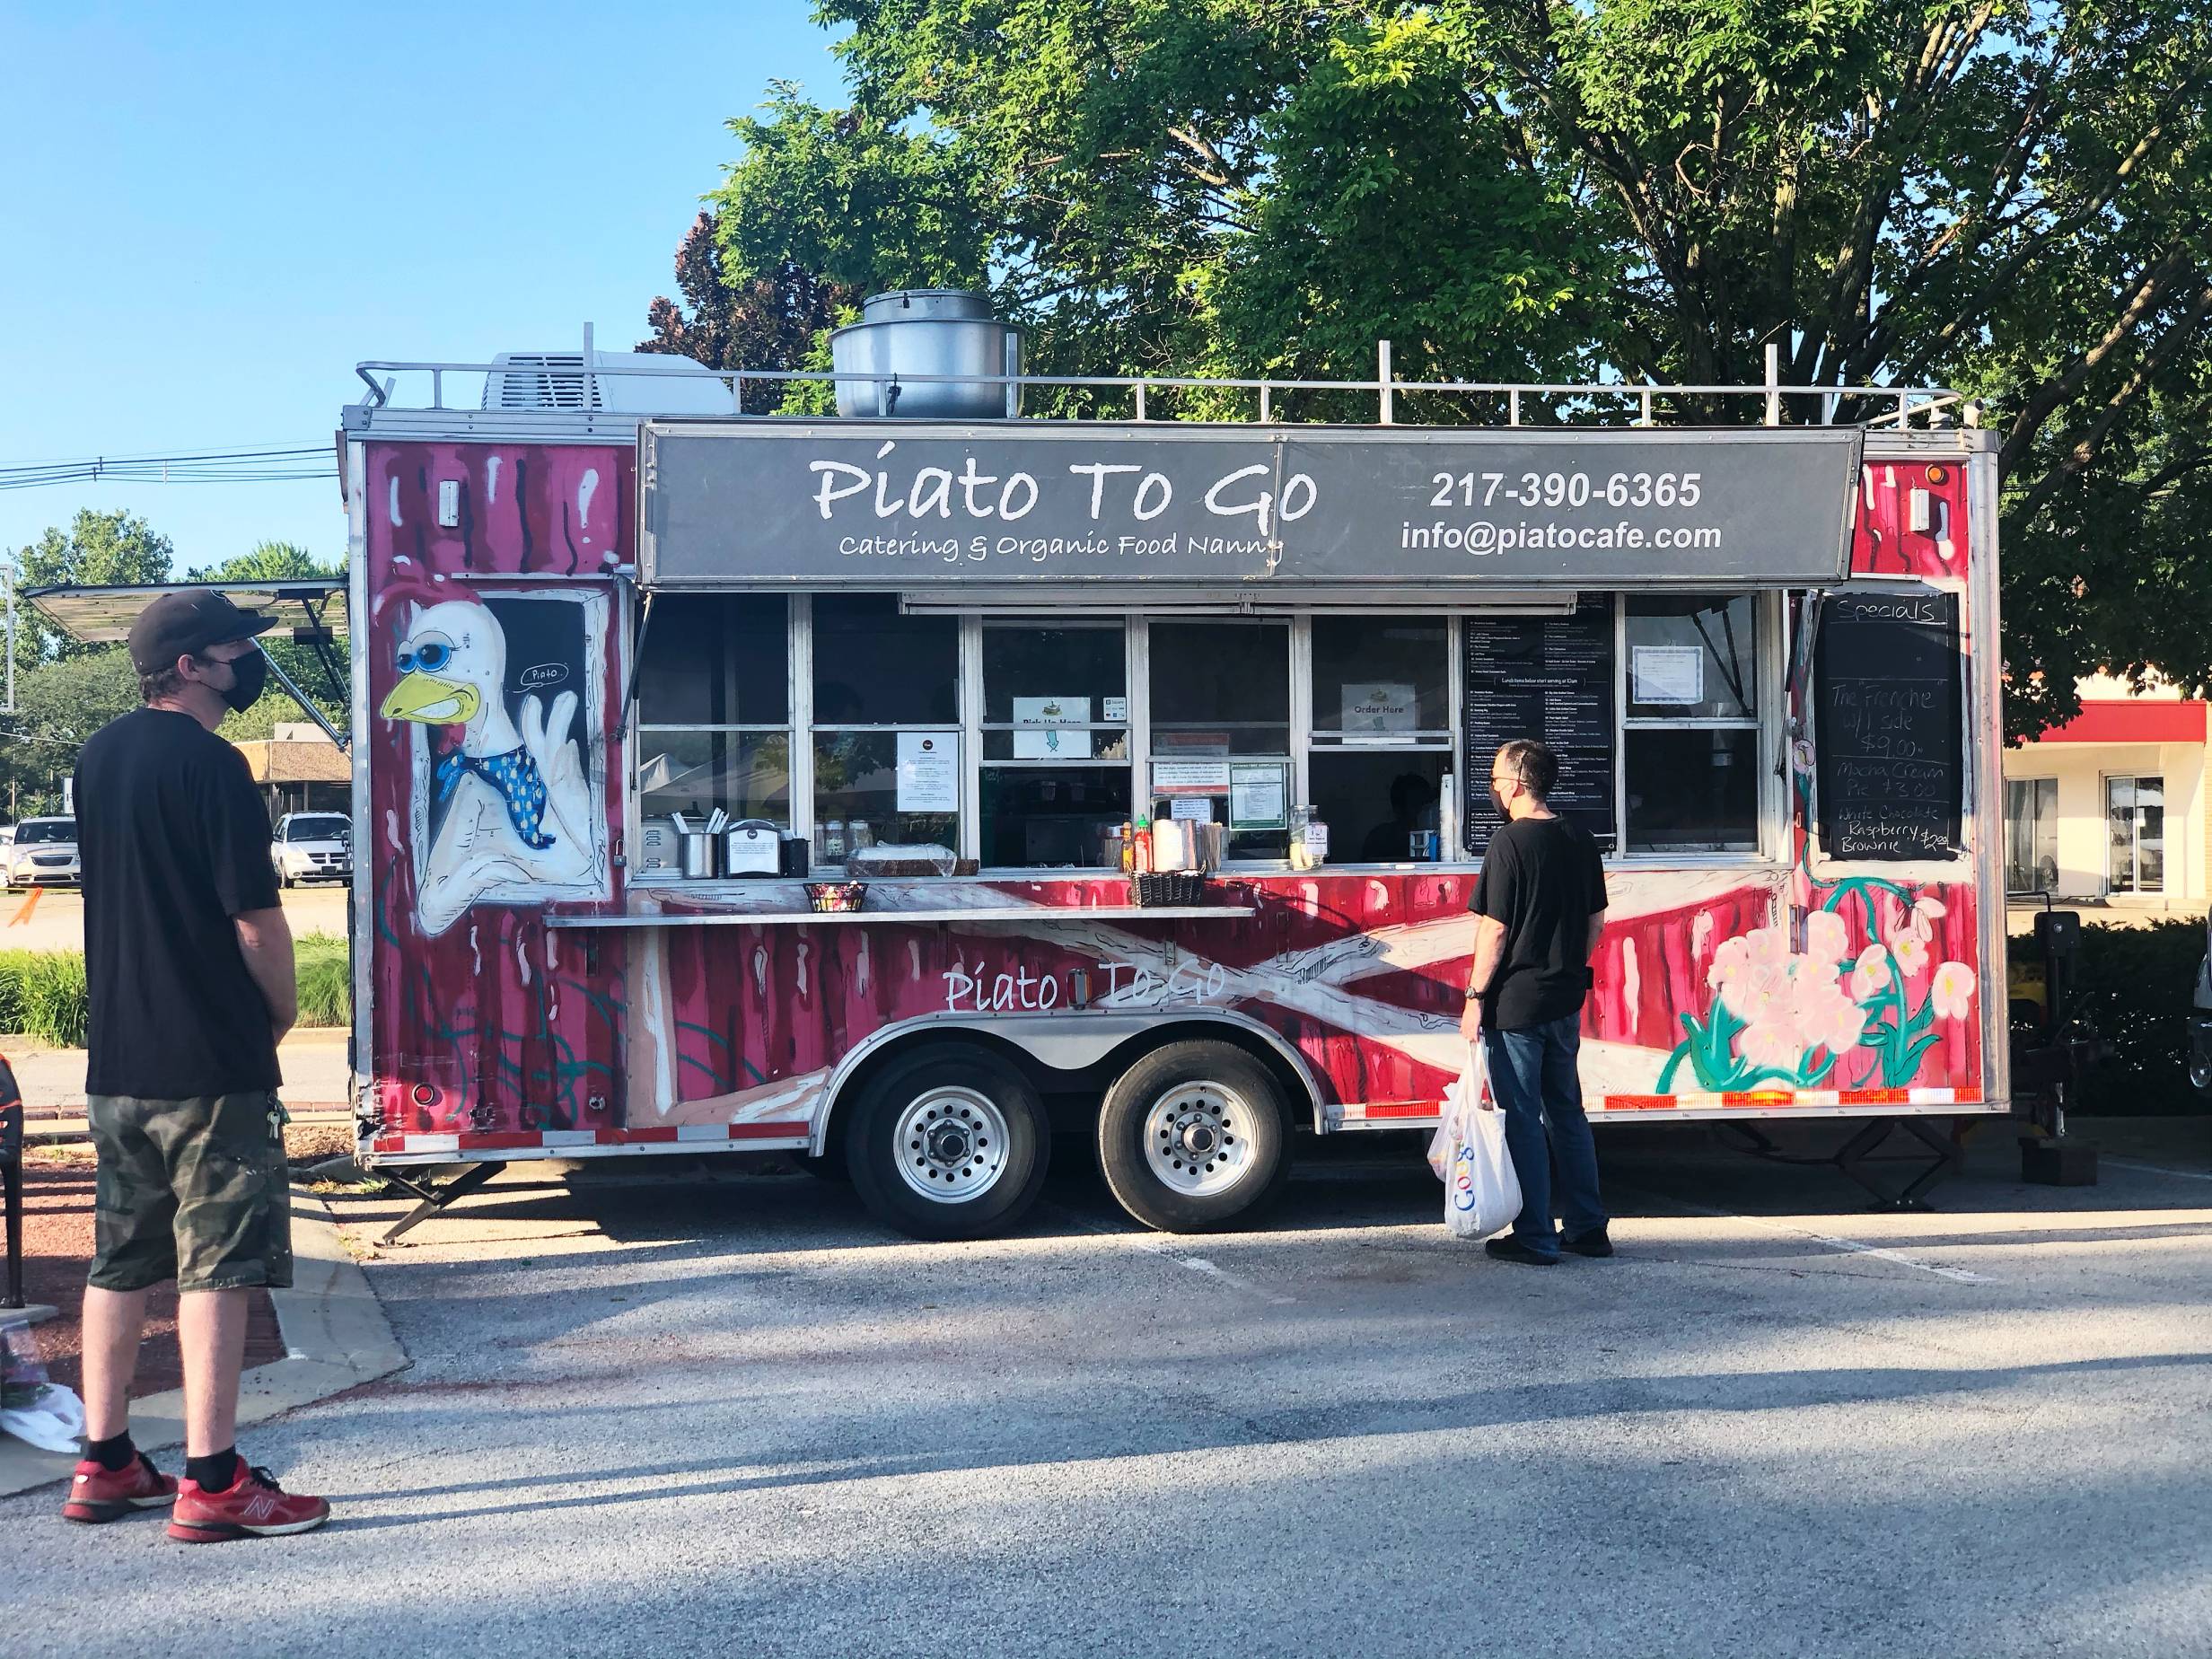 A red food truck with a sunglasses-wearig chicken, Piato To Go is parked in a parking lot while two customers wait to be served. Photo by Alyssa Buckley.